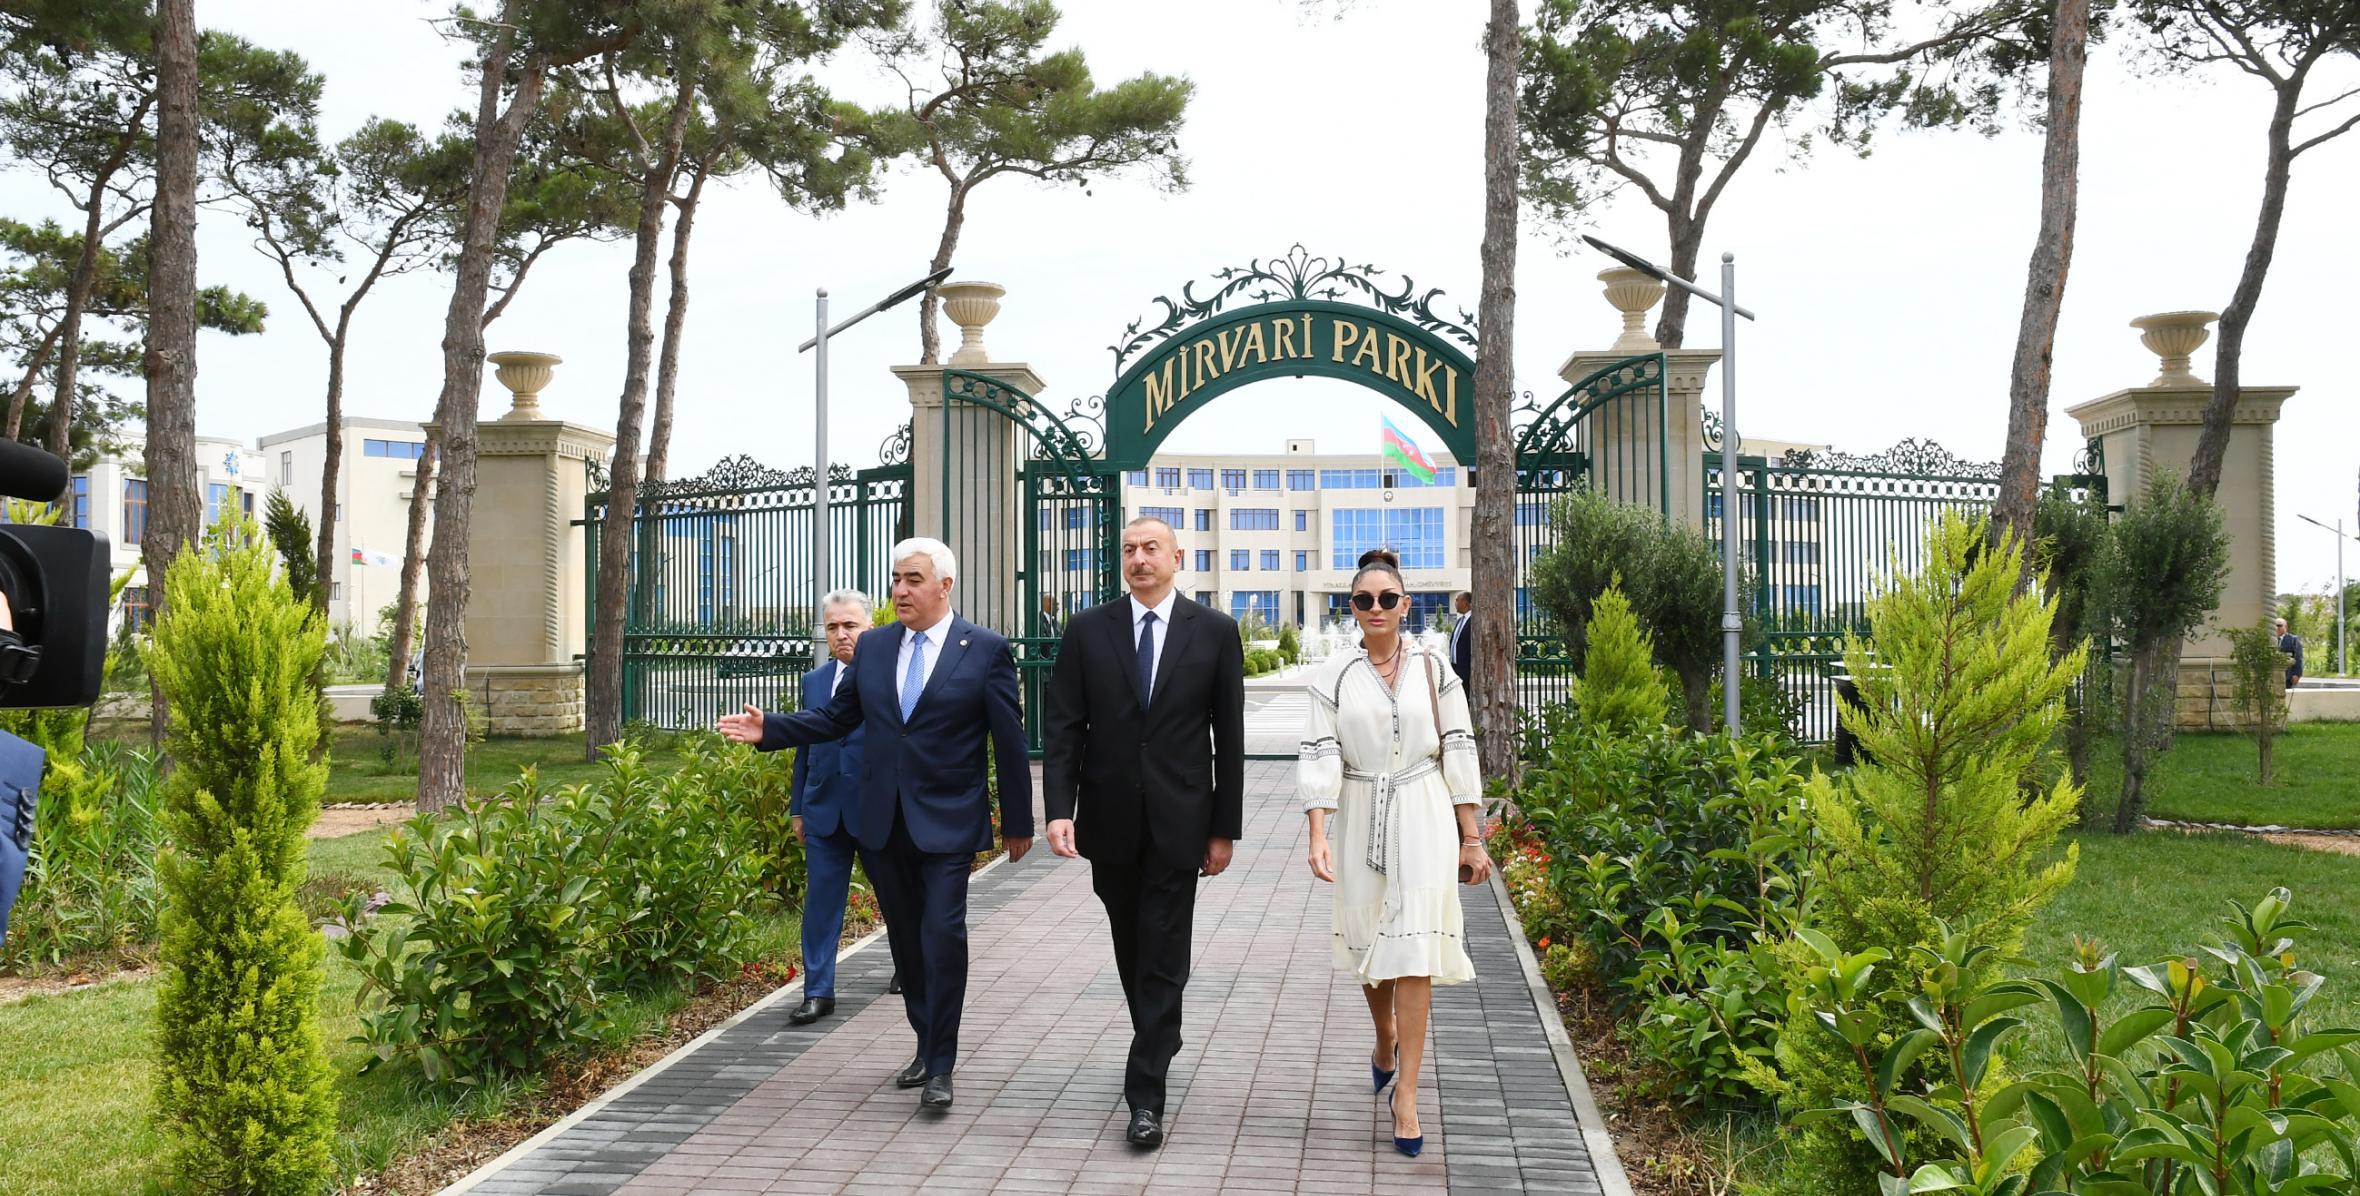 Ilham Aliyev attended opening of “Mirvari” Park Complex in Pirallahi district